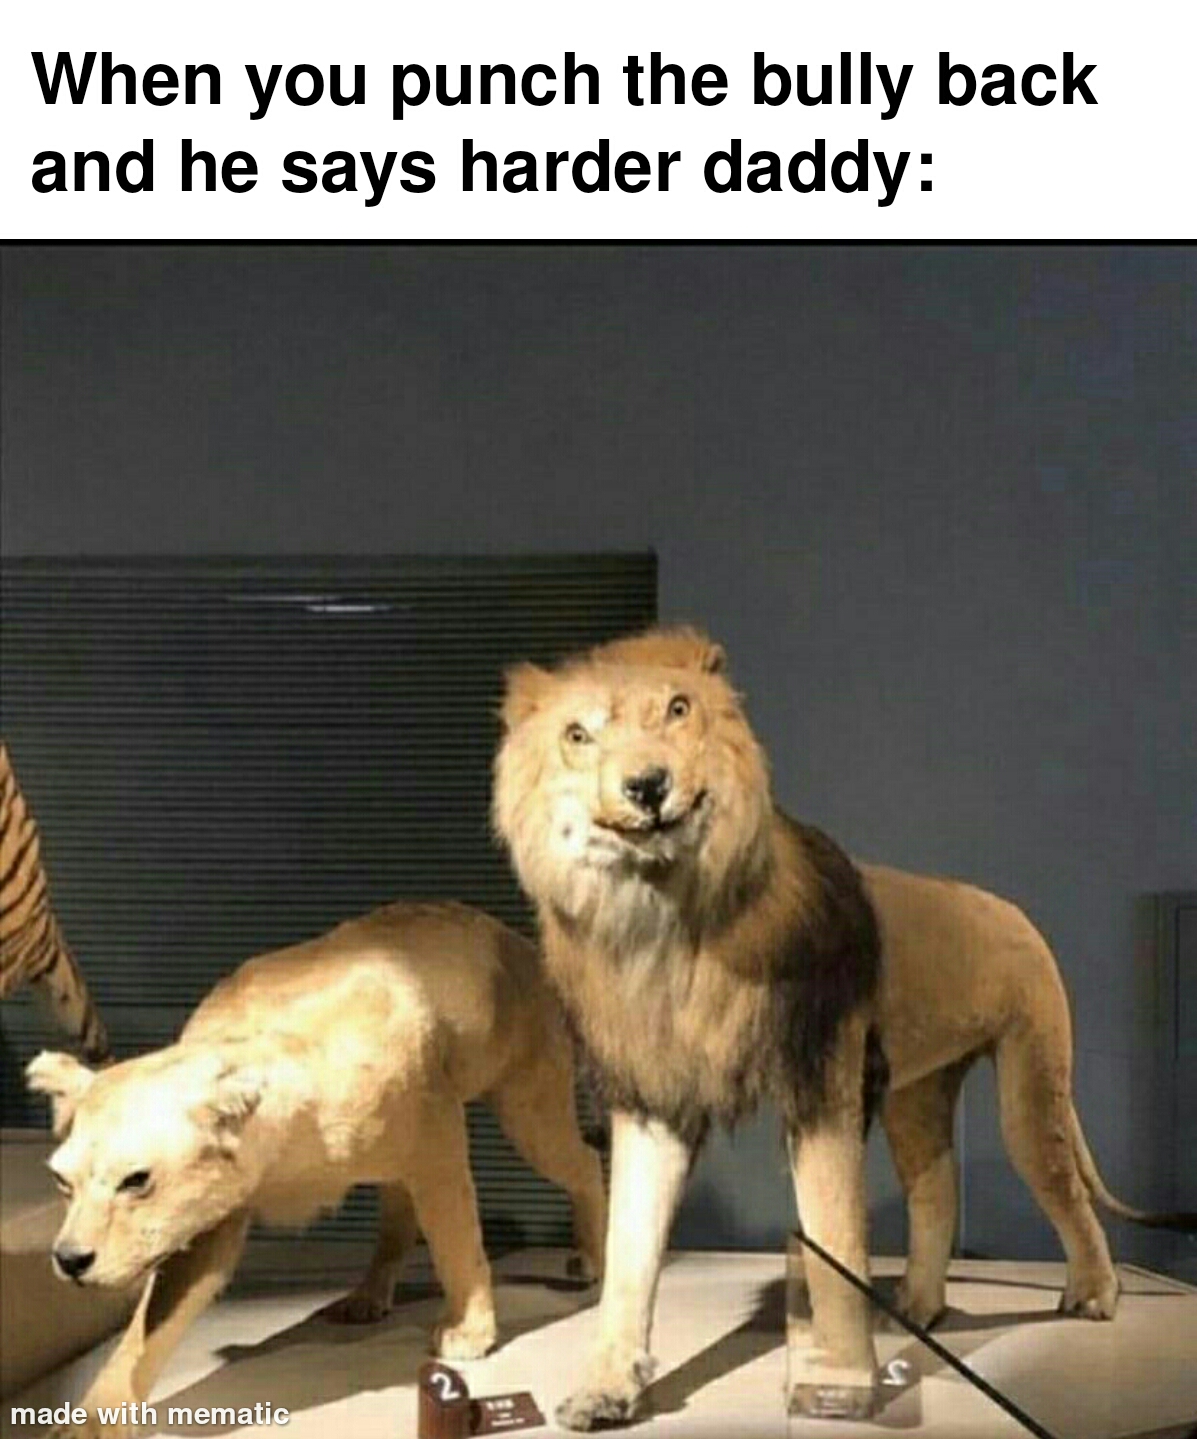 you bite your prey and it says harder daddy - When you punch the bully back and he says harder daddy made with mematic